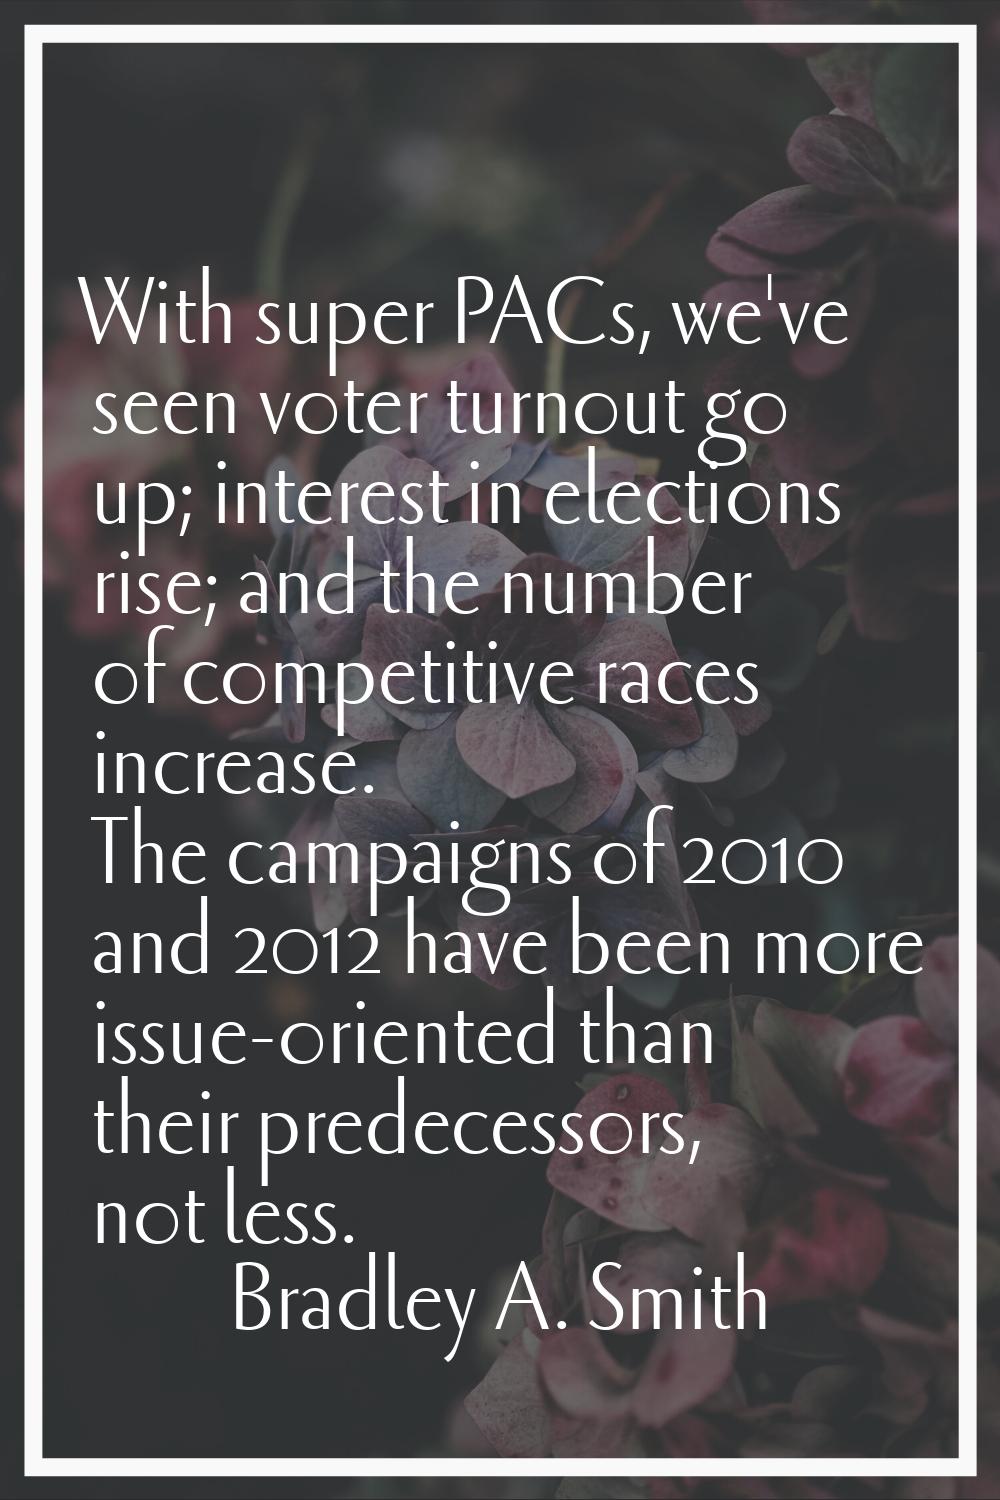 With super PACs, we've seen voter turnout go up; interest in elections rise; and the number of comp